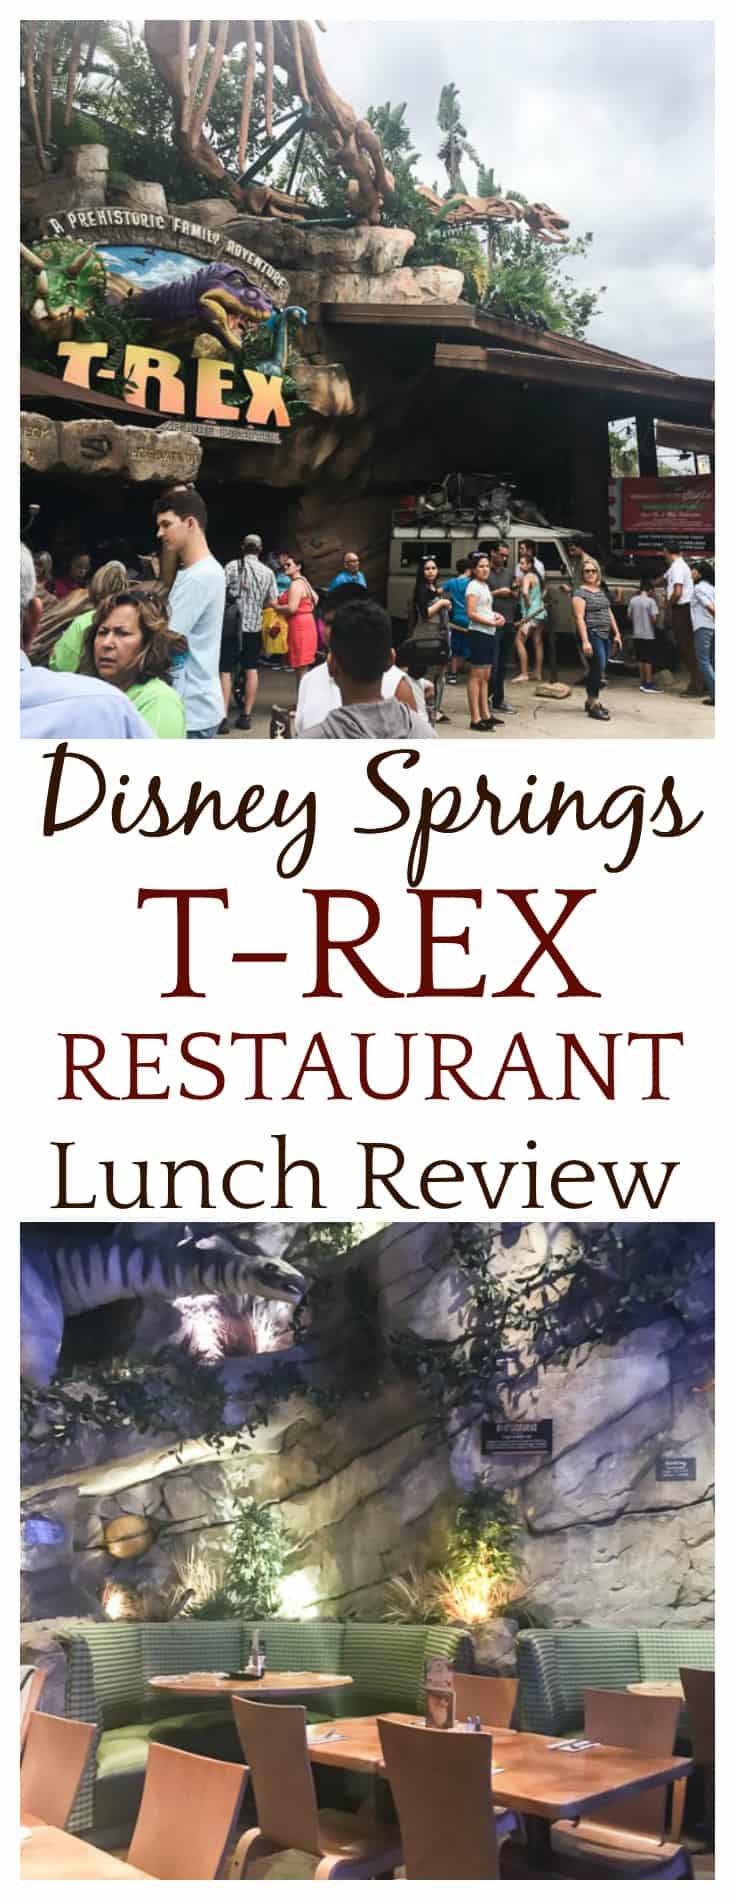 This Disney Springs T-REX Restaurant lunch review is based on my experience when visiting the restaurant in November 2017 with my family. | #disneydining #disneysprings #TREXrestaurant #disneyworld #restaurants #dlb